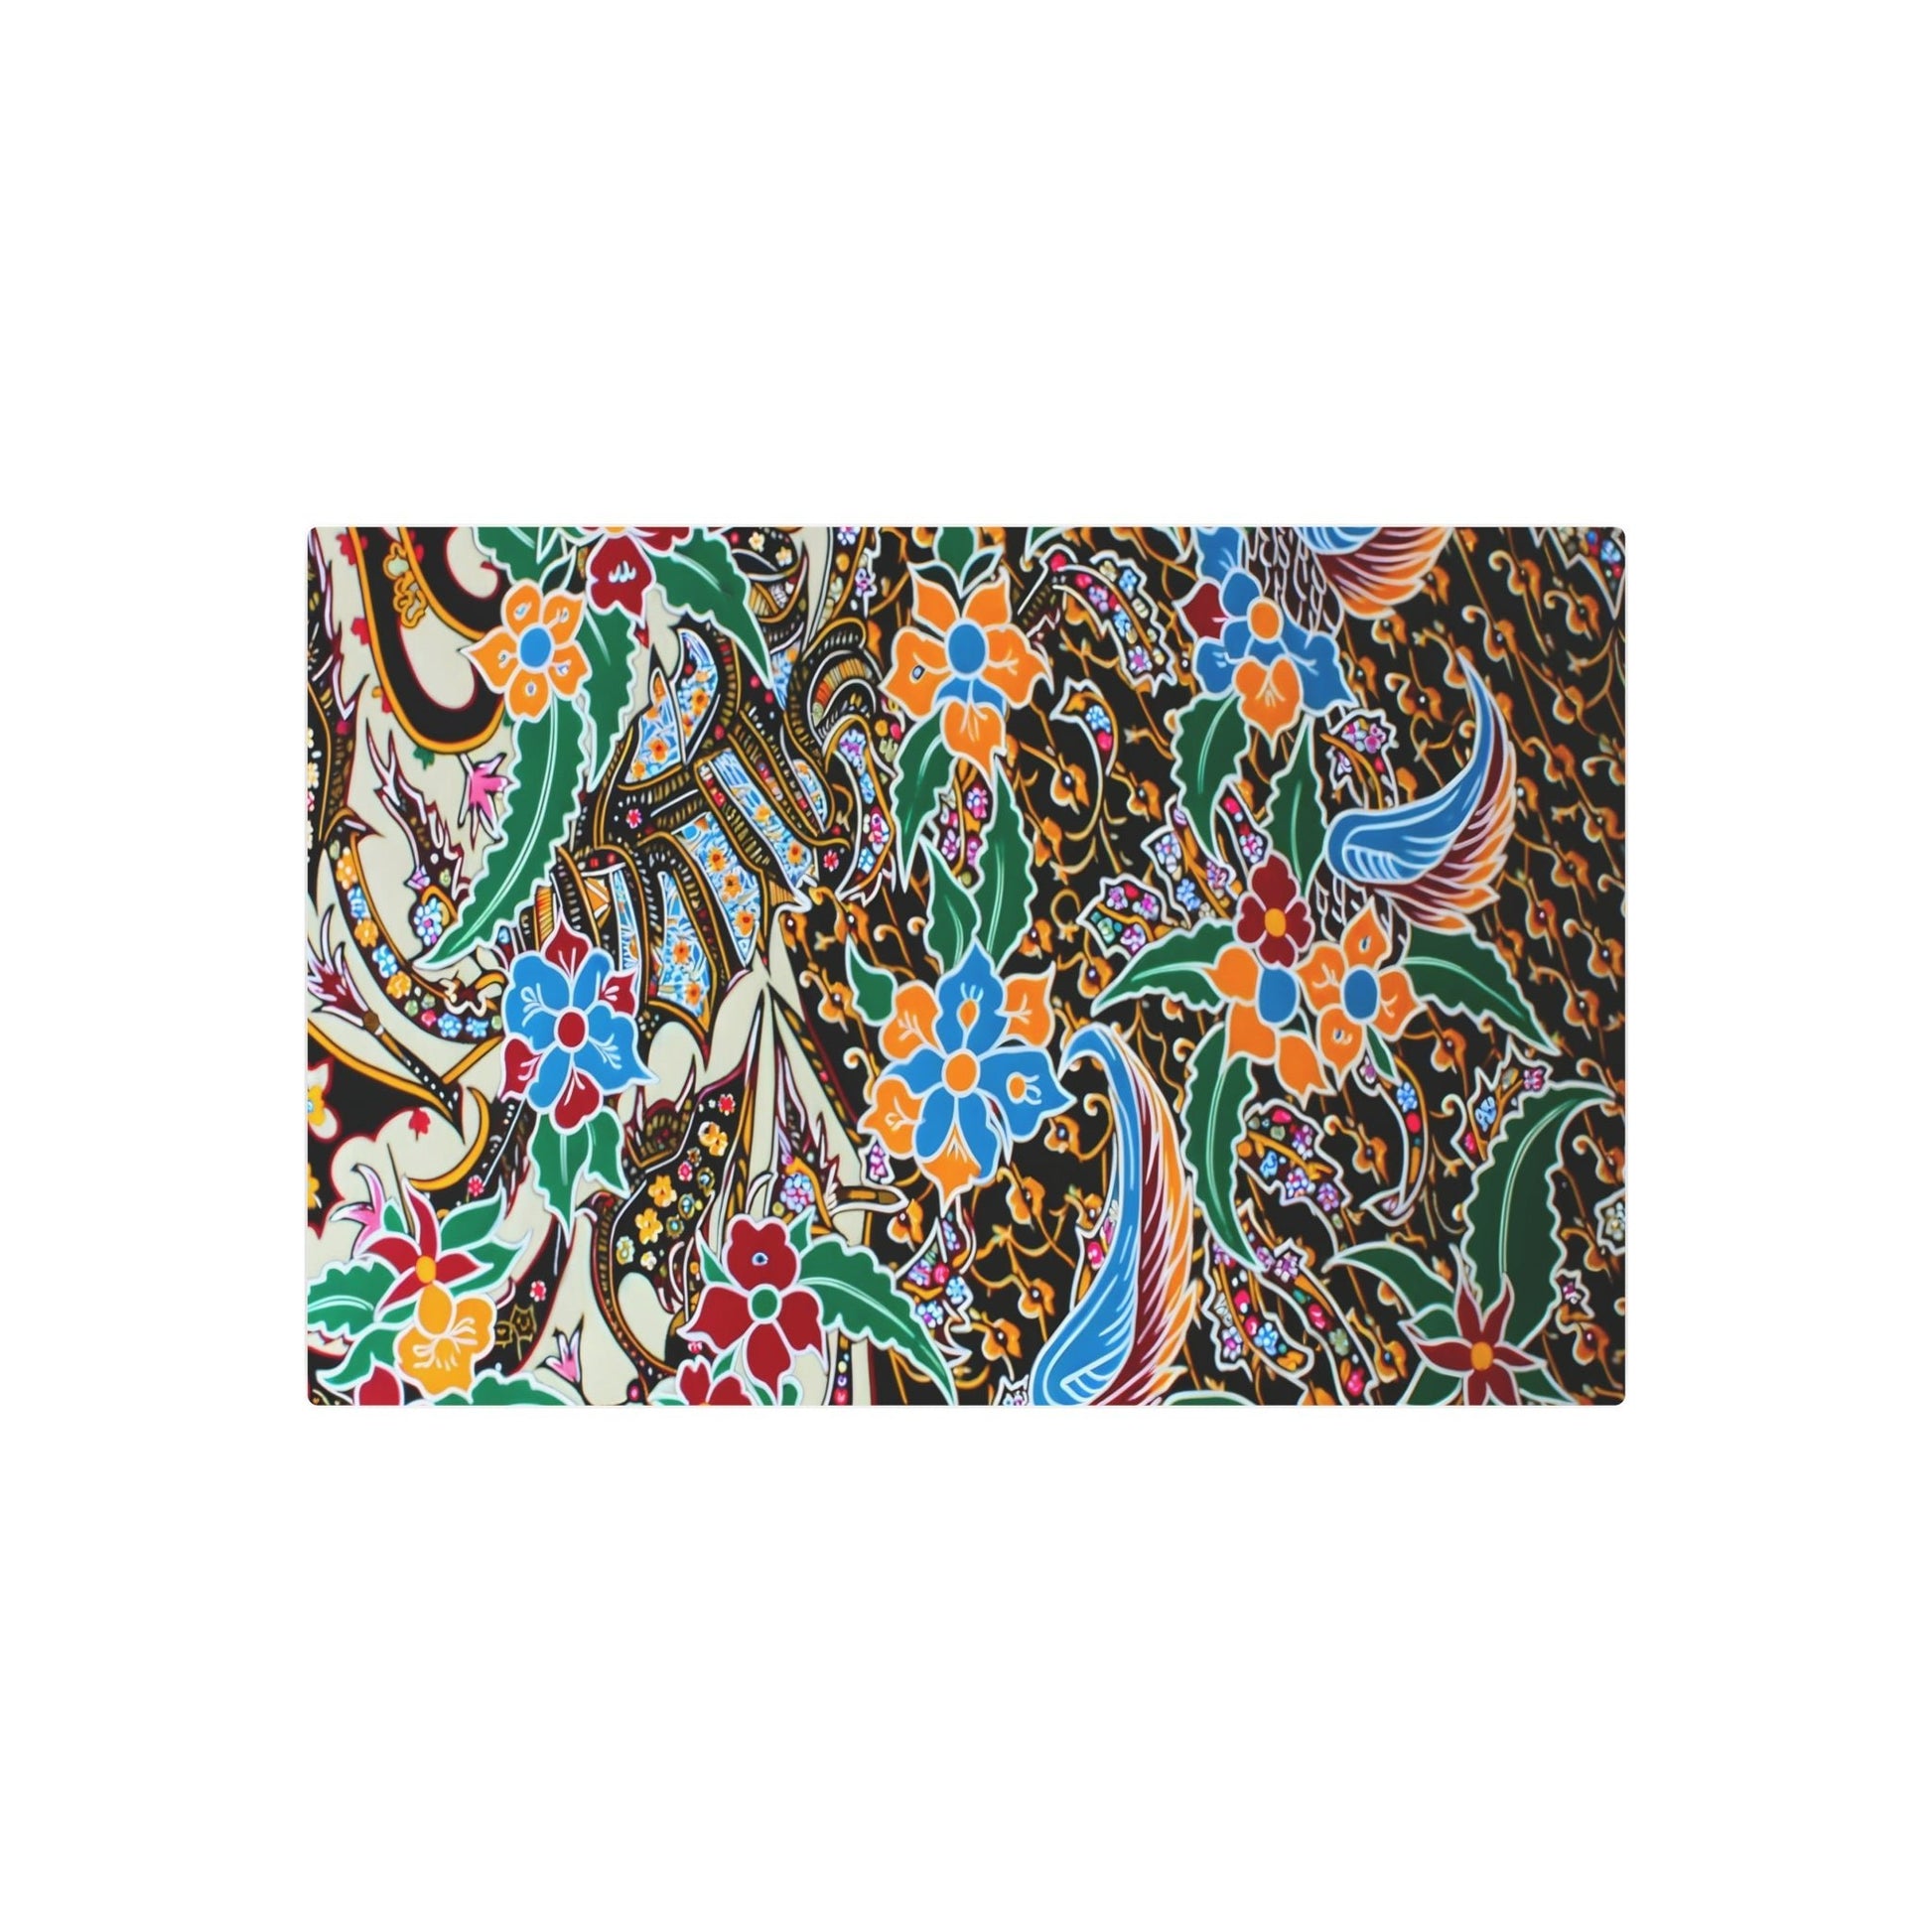 Metal Poster Art | "Vibrant Indonesian Batik Art with Intricate Patterns - Traditional Floral, Bird and Geometric Design in Non-Western & Global Styles Category" - Metal Poster Art 30″ x 20″ (Horizontal) 0.12''